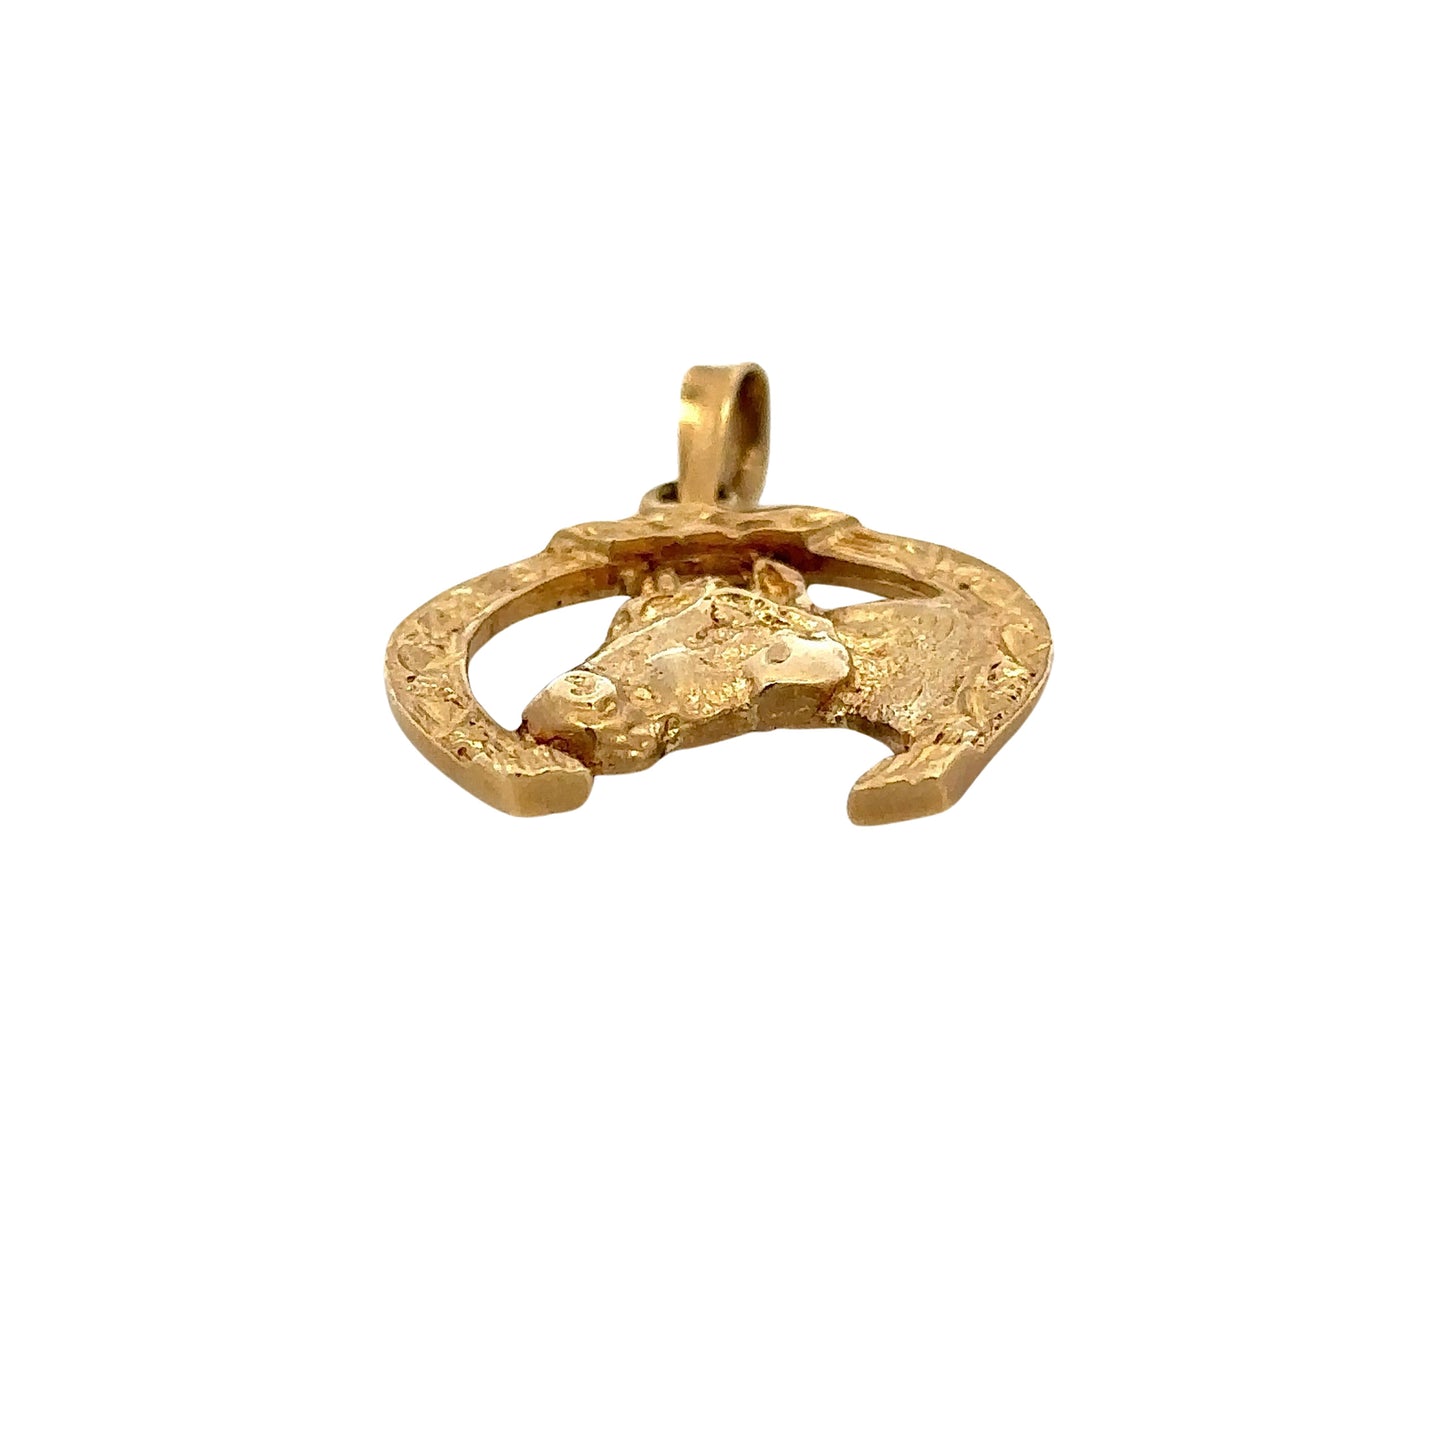 Bottom of horse shoe pendant in yellow gold